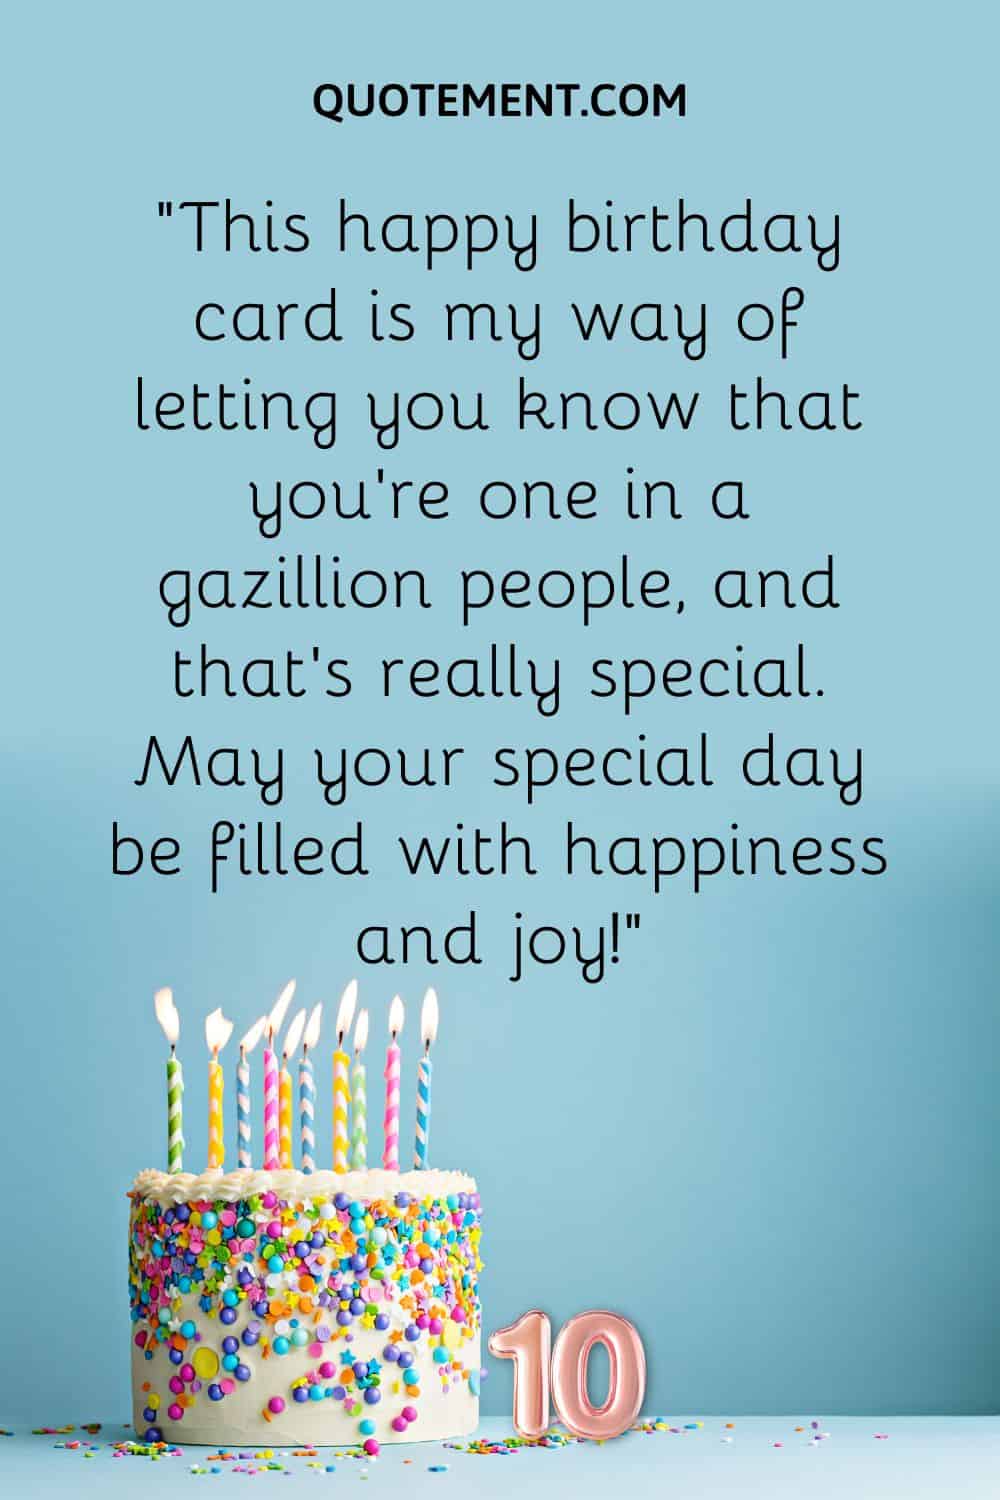 “This happy birthday card is my way of letting you know that you’re one in a gazillion people, and that’s really special. May your special day be filled with happiness and joy!”